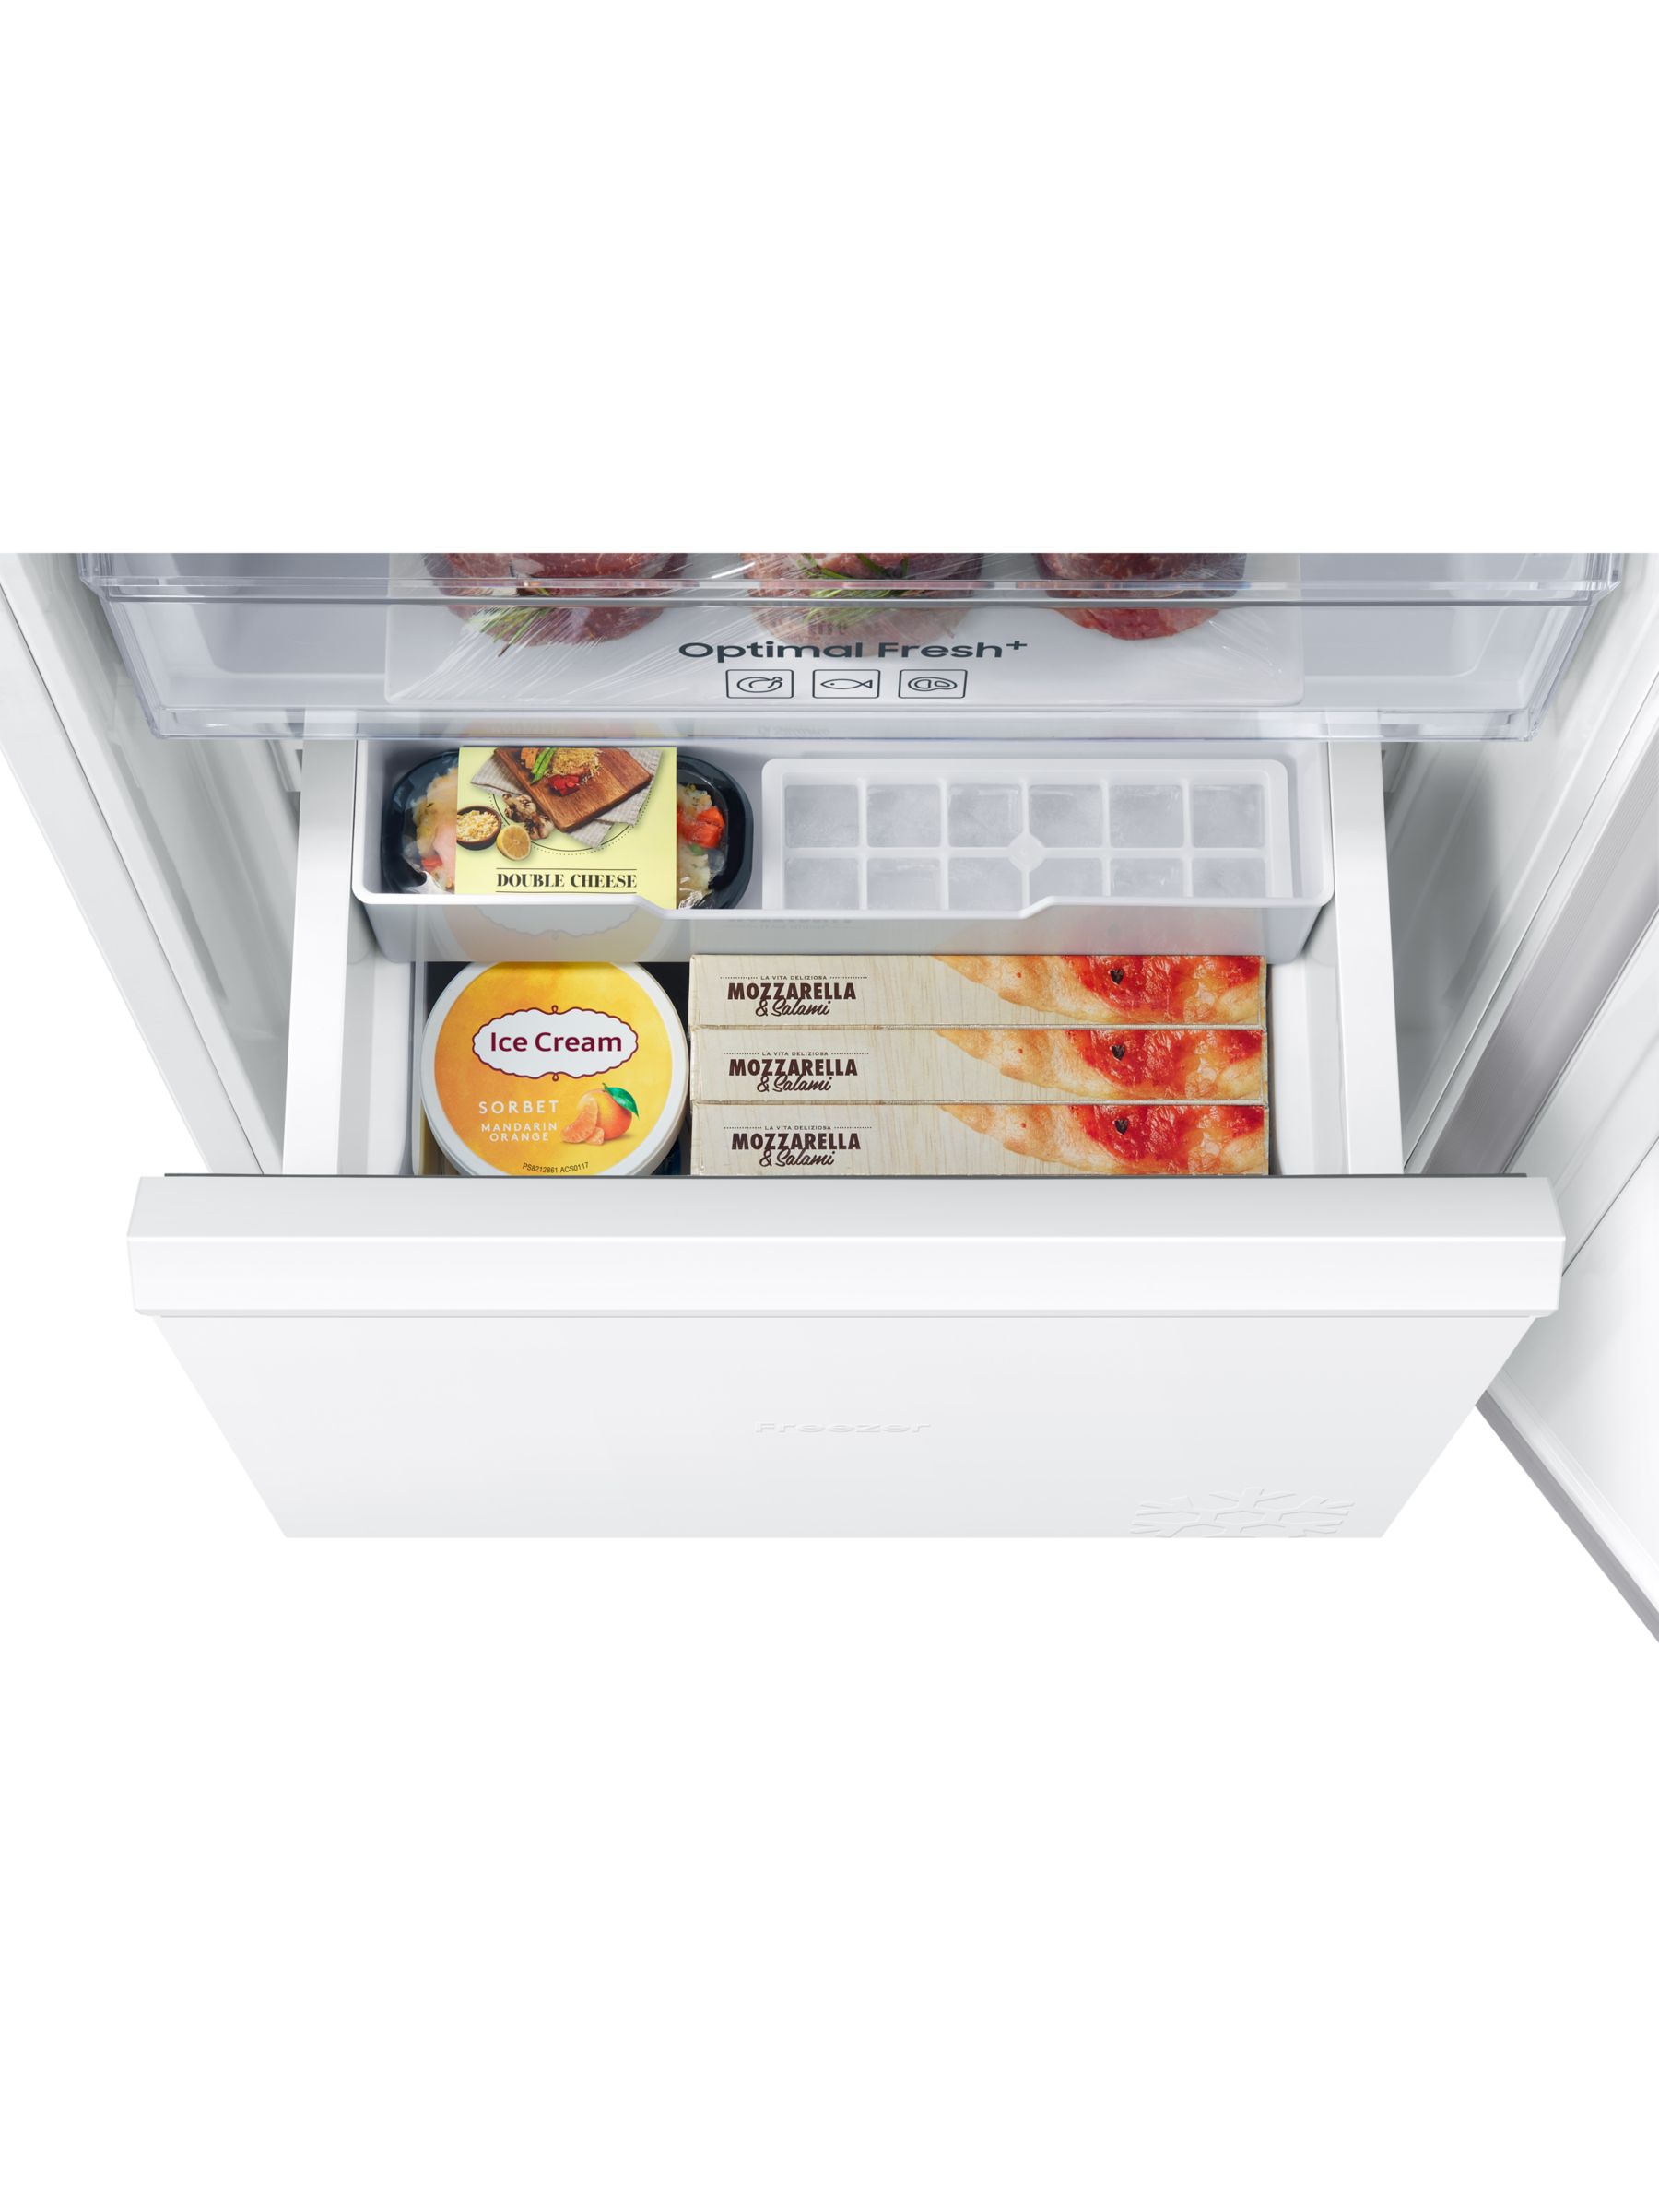 Why You Should Buy an Integrated Fridge Freezer with Water Dispenser